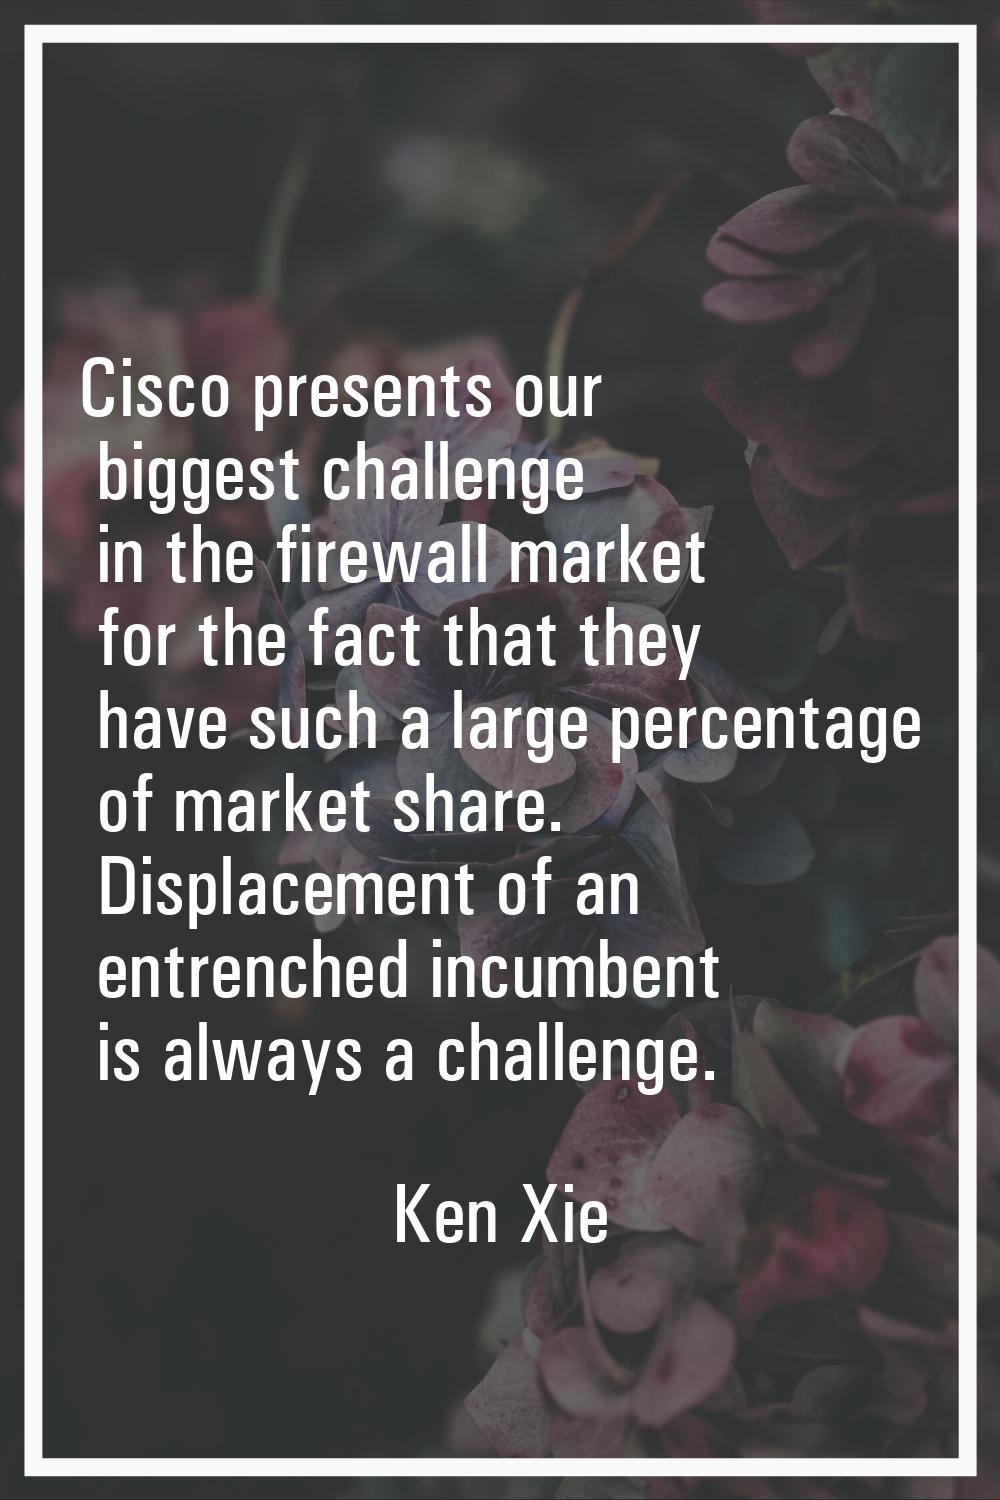 Cisco presents our biggest challenge in the firewall market for the fact that they have such a larg